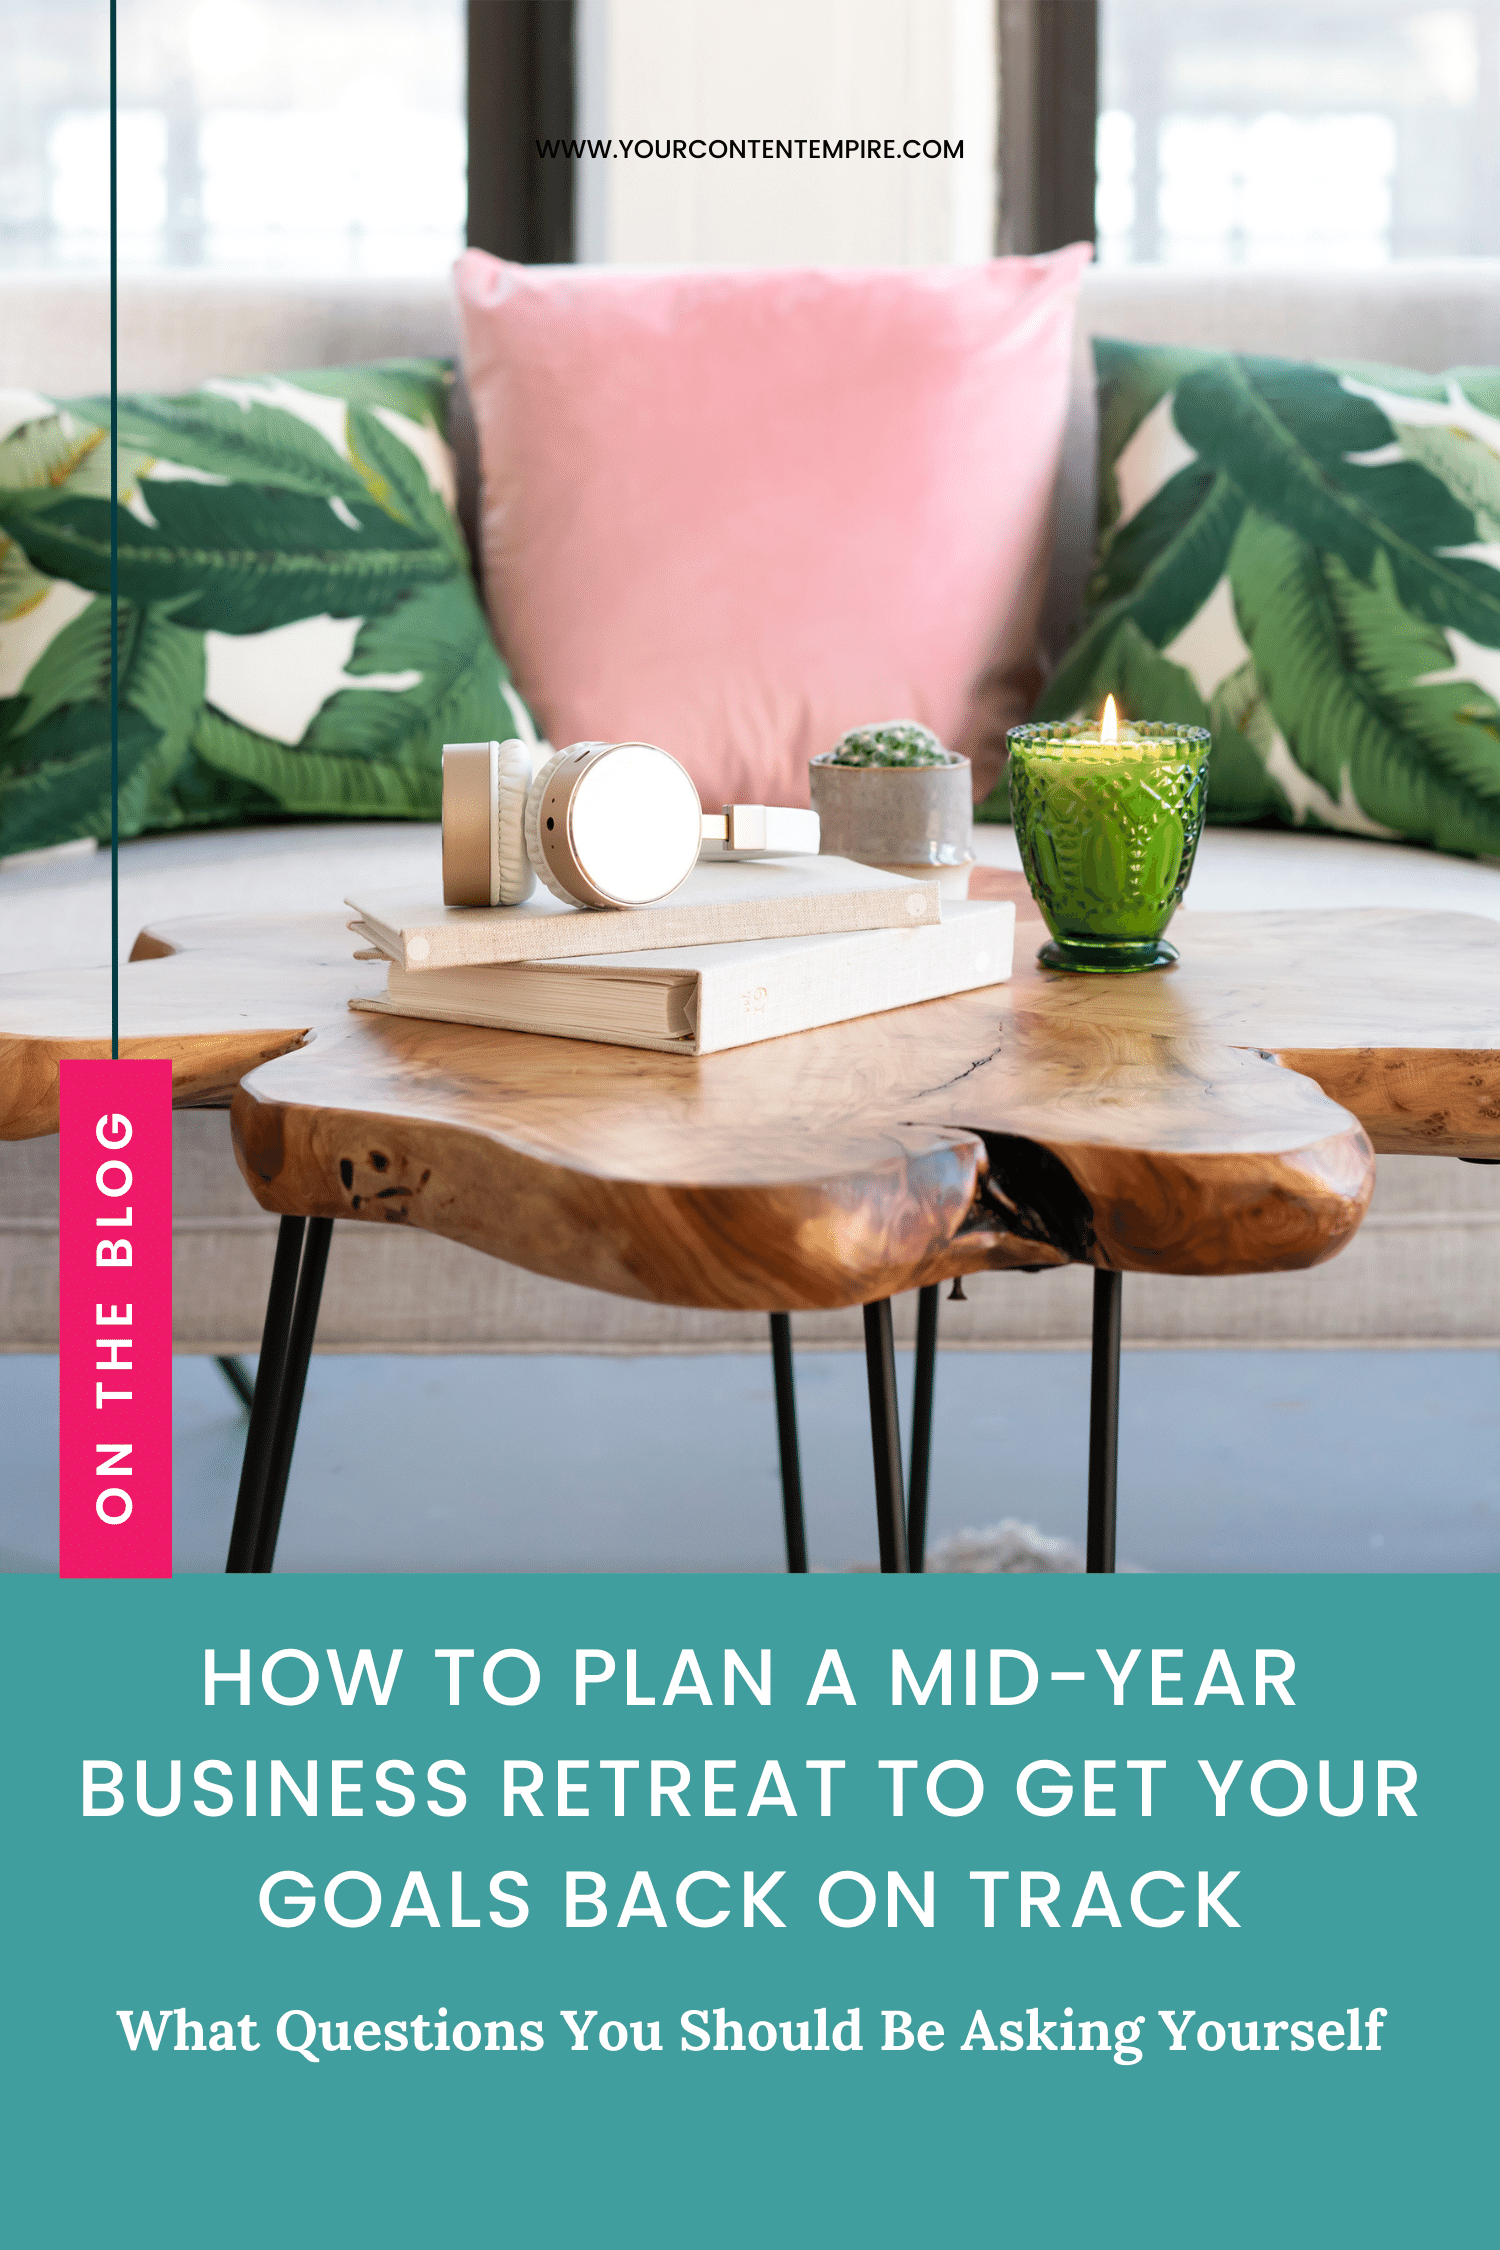 How to Plan a Mid-Year Business Retreat to Get Your Goals Back on Track